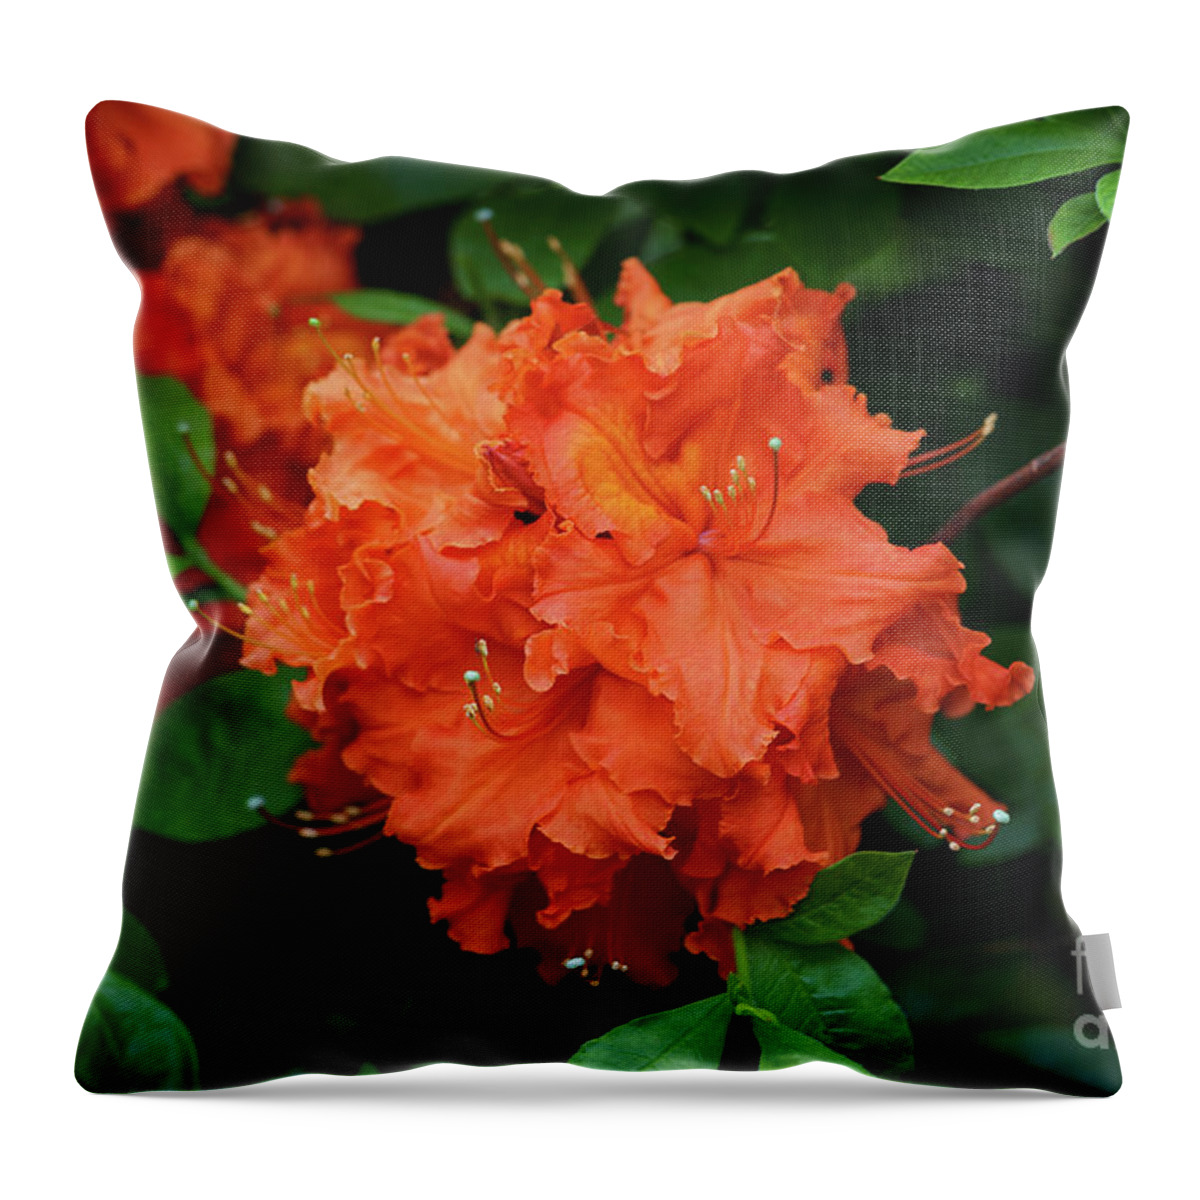 Rhododendron In Orange Throw Pillow featuring the photograph Rhododendron in Orange by Rachel Cohen